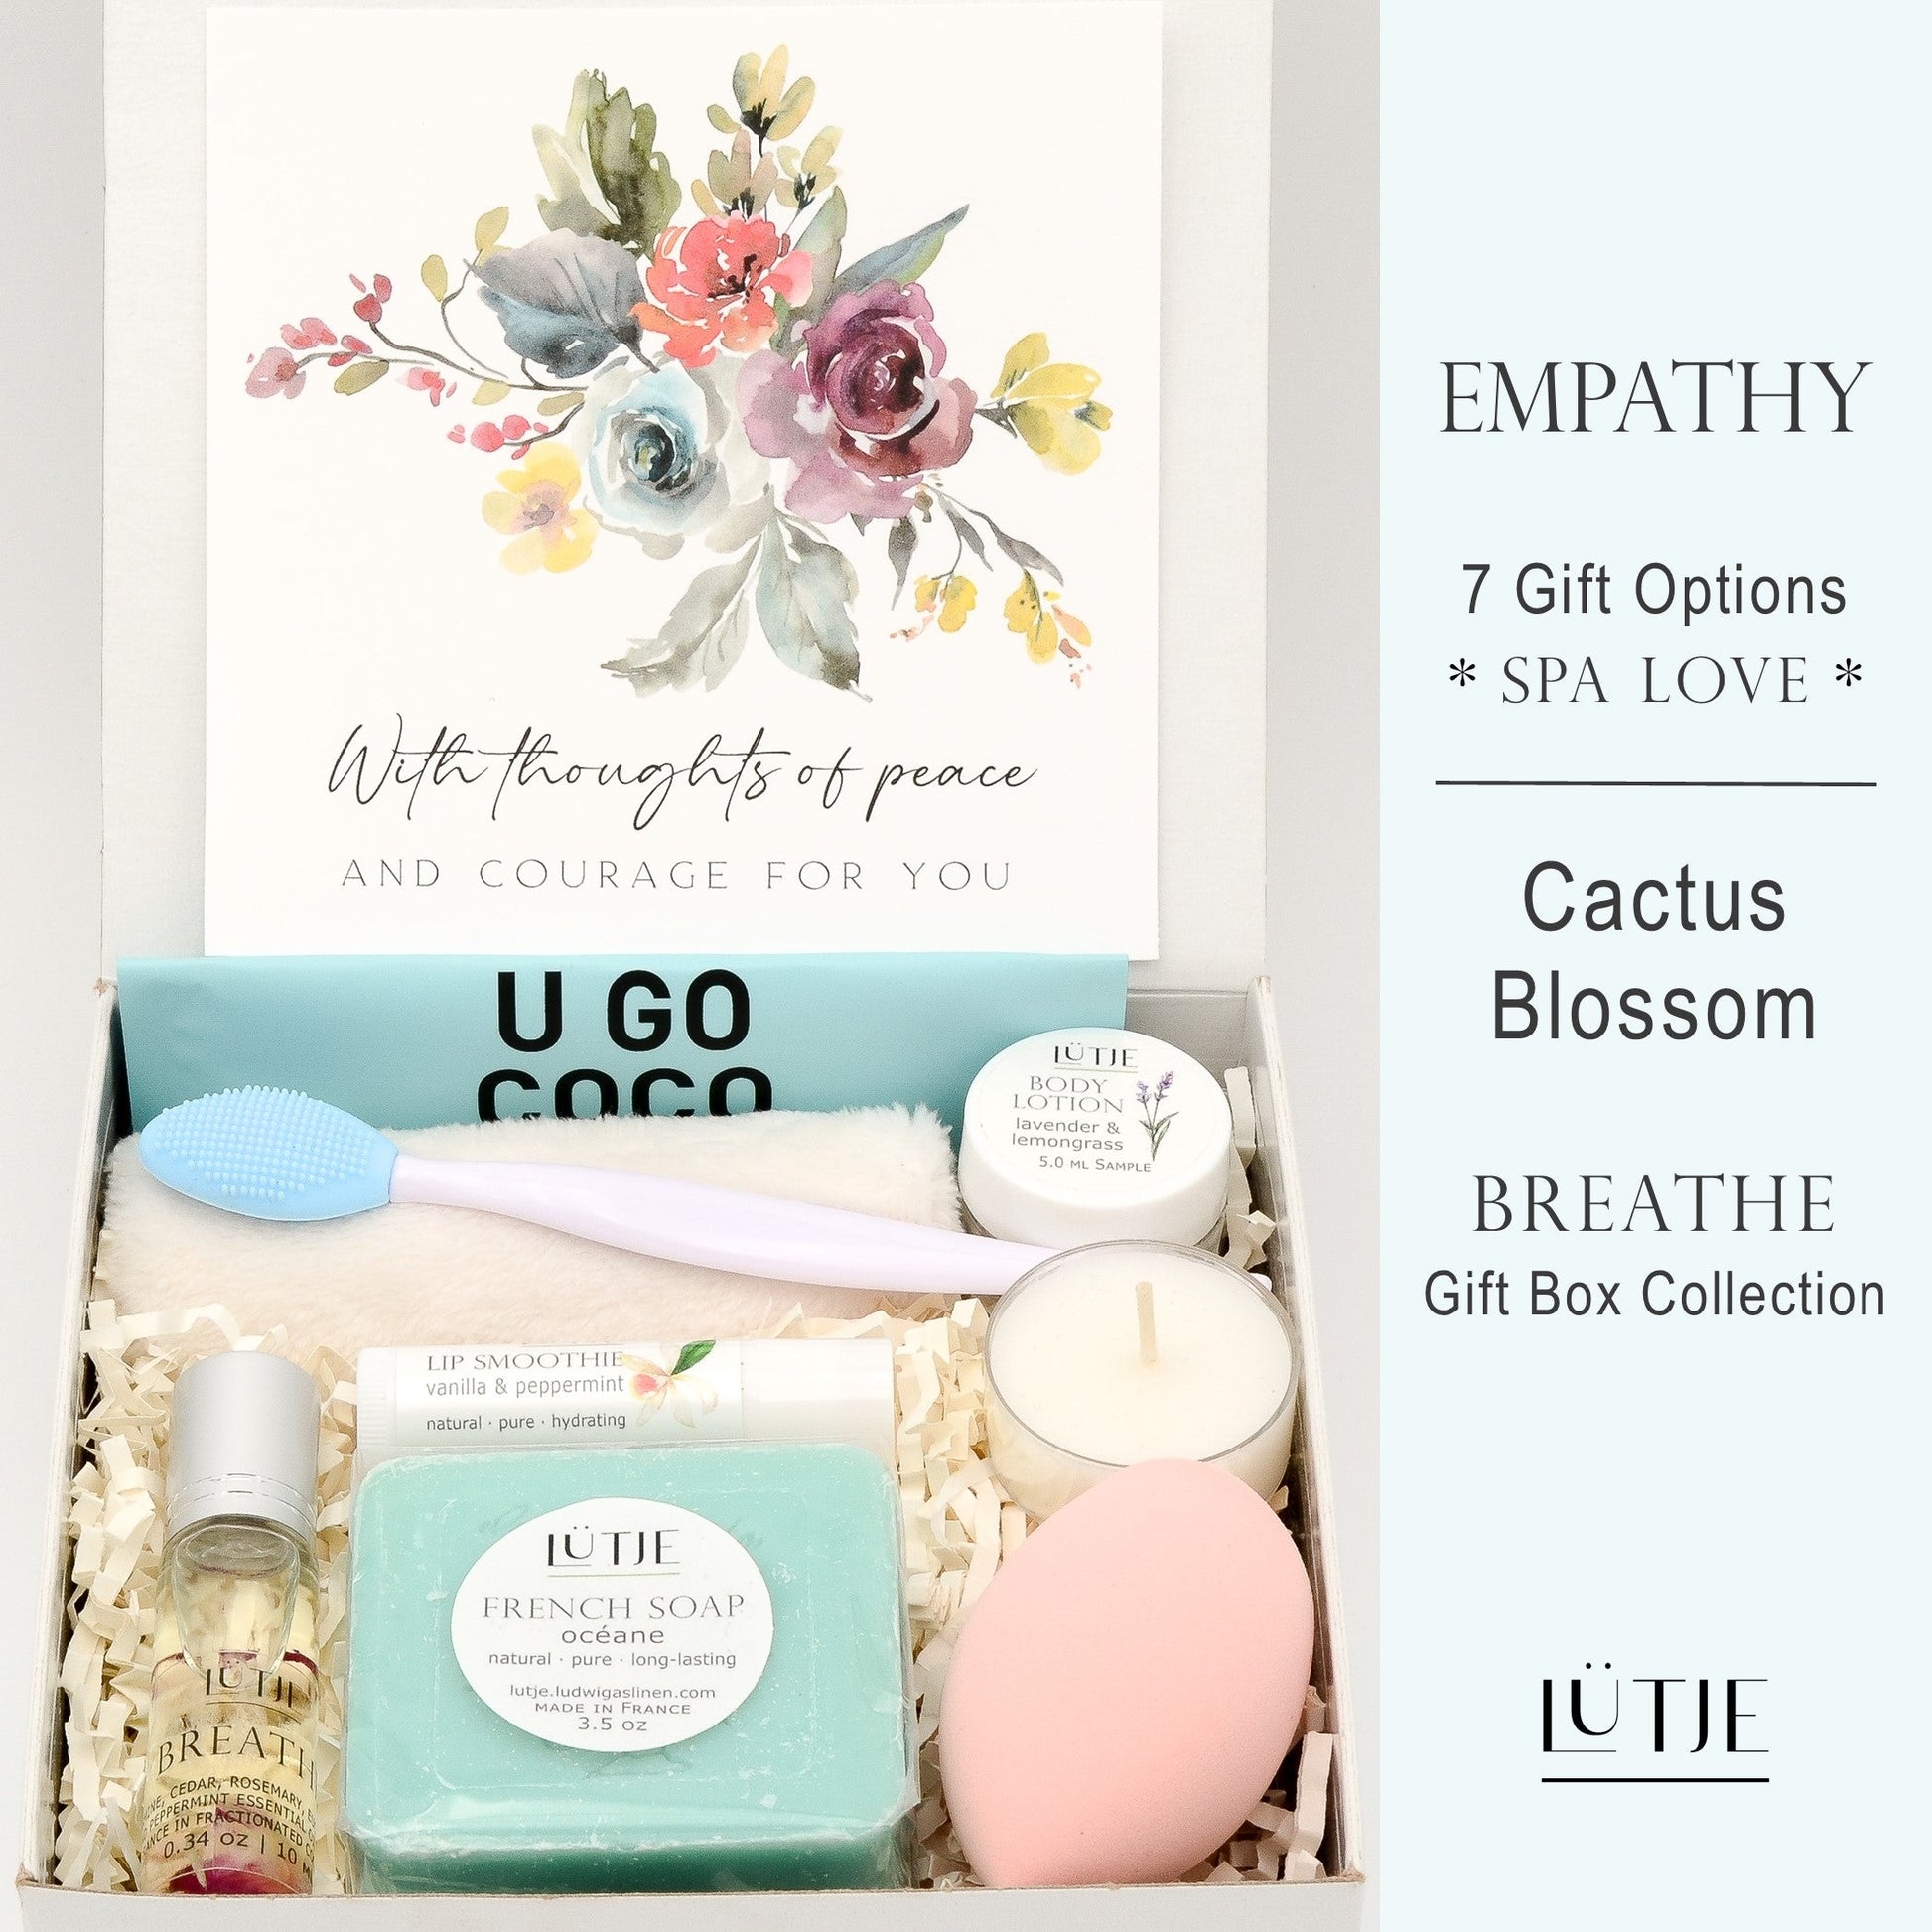 Gift Box for women, wife, daughter, BFF, sister, mom, or grandma, includes Cactus Blossom hand lotion spray and body lotion, essential oil, lip balm, soothing muscle balm, Lavender & Chamomile room & linen spray, French soap, French bath salts, hydrating face mask, other bath, spa and self-care items, and 18K gold-plated necklace with engraved heart.